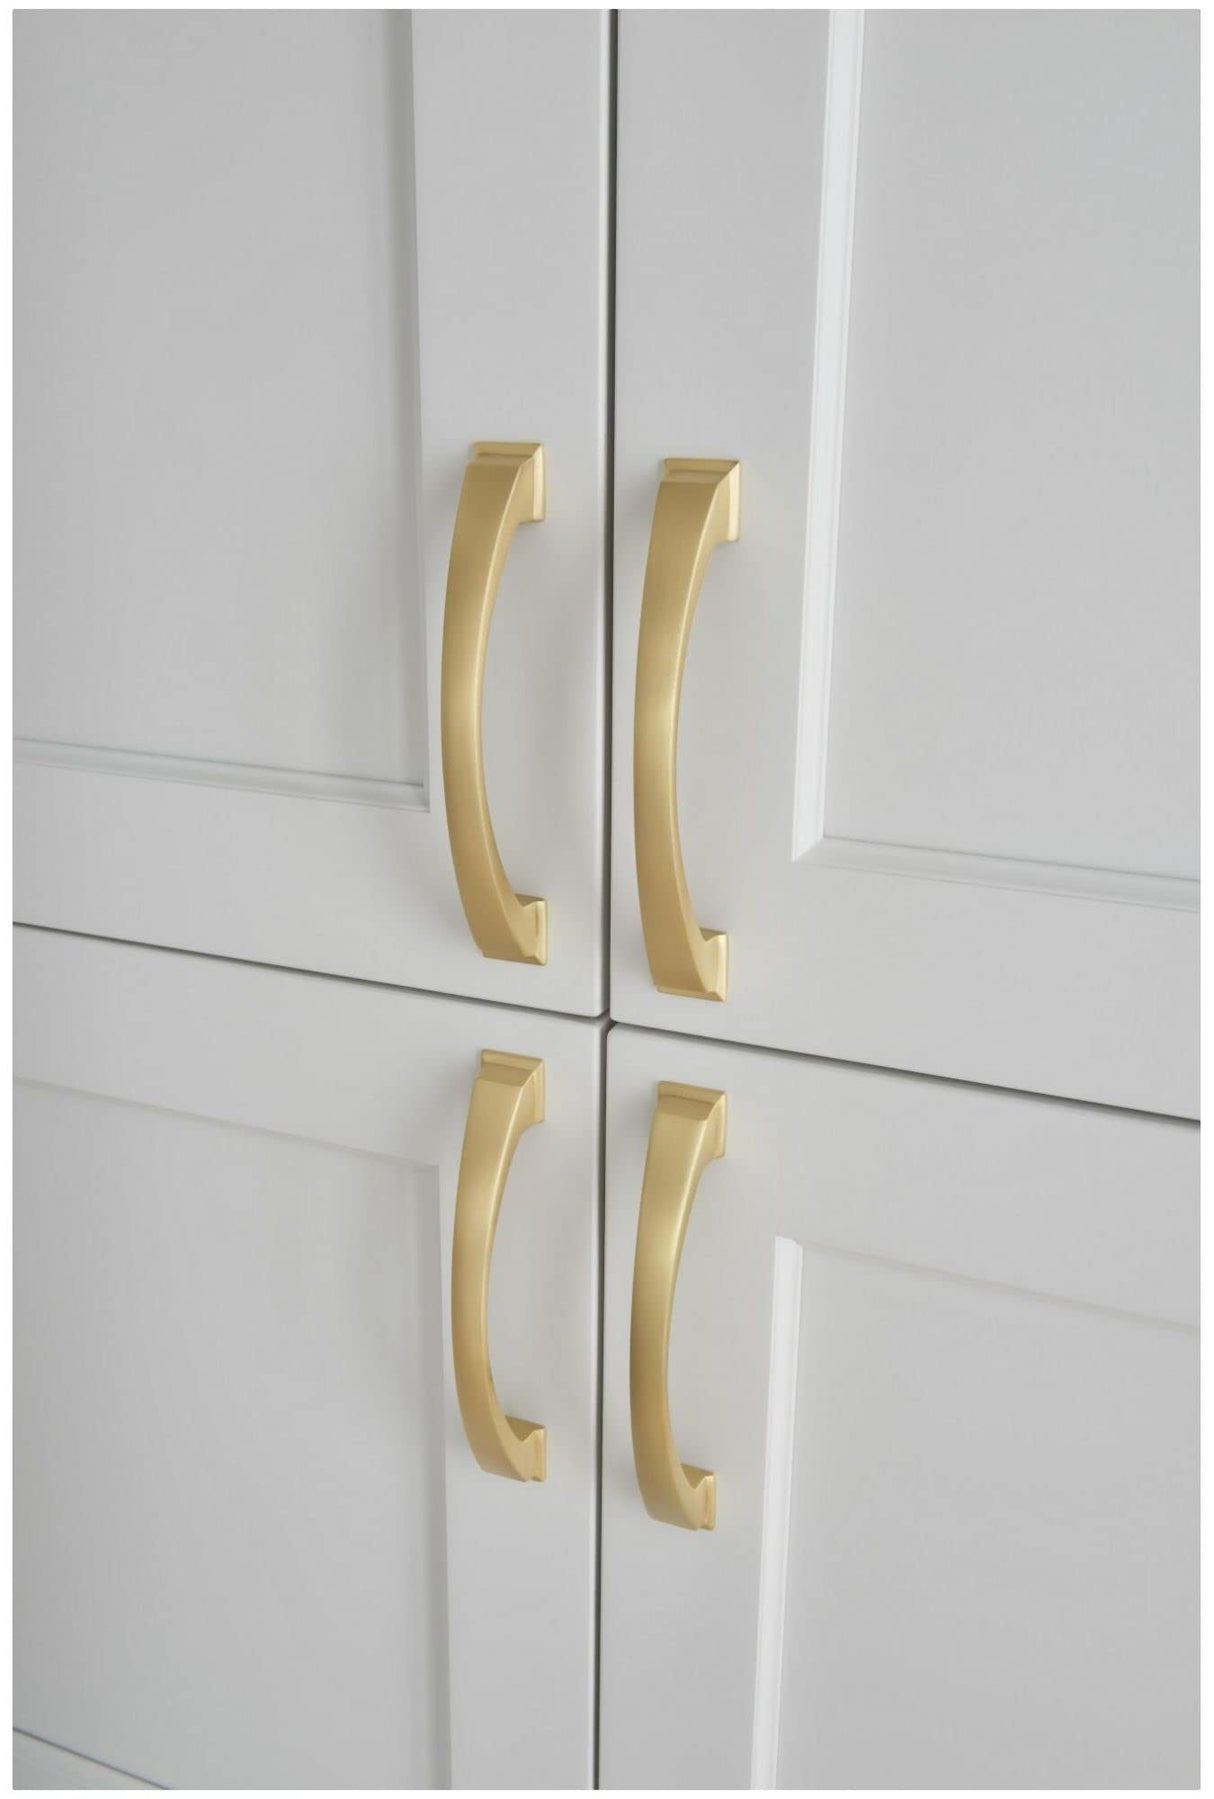 Jeffrey Alexander 944-224BG 224 mm Center-to-Center Brushed Gold Arched Roman Cabinet Pull